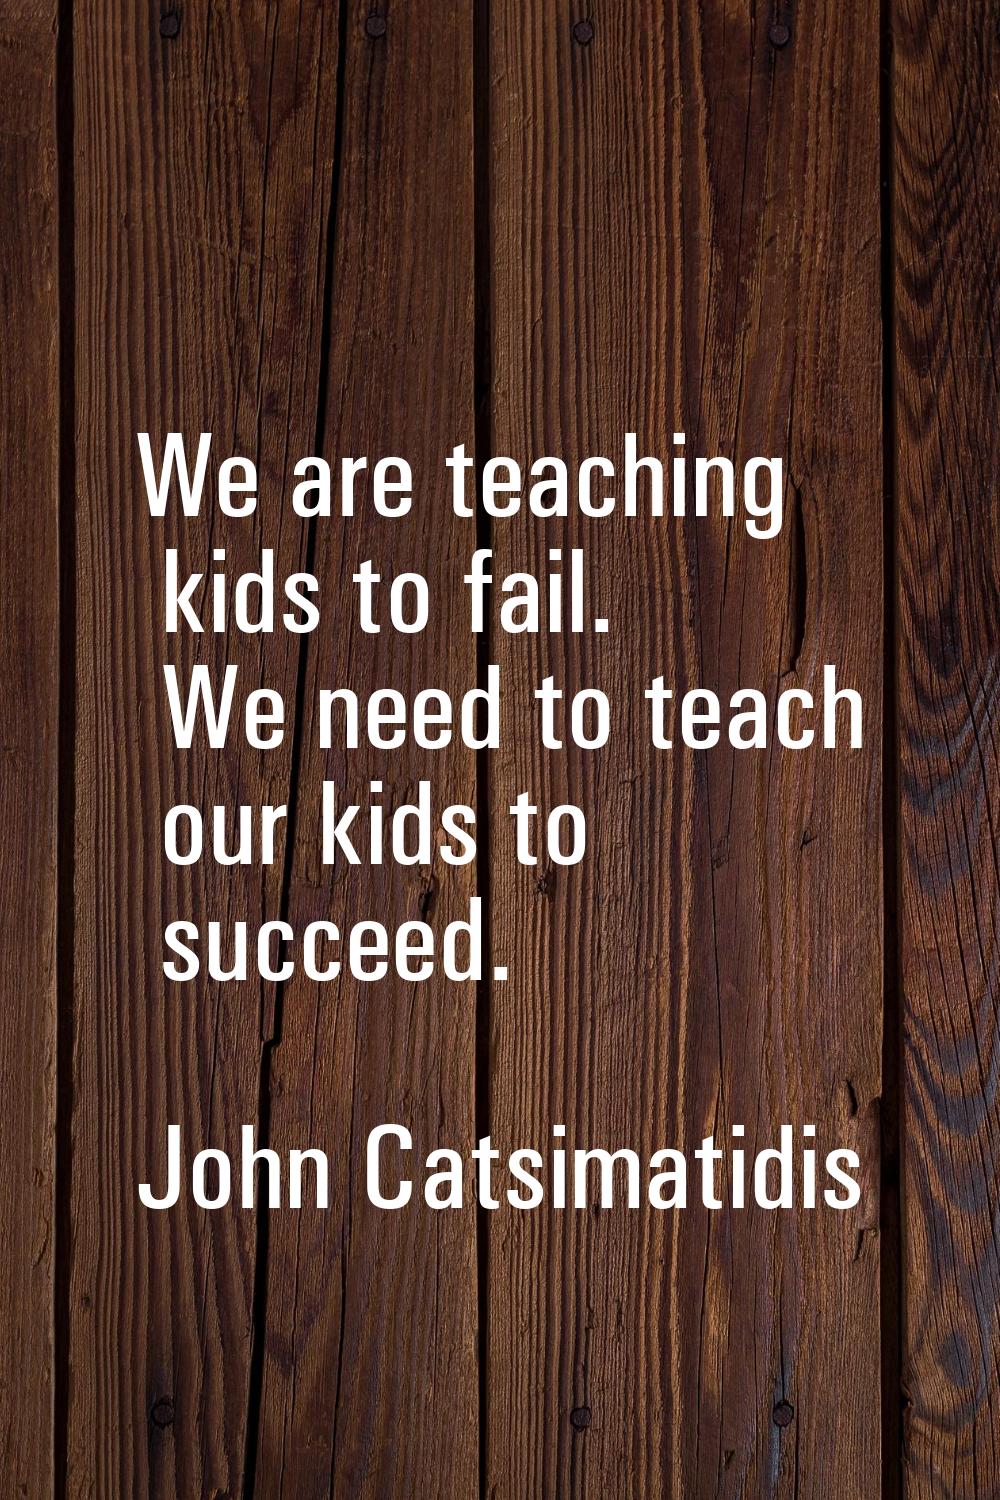 We are teaching kids to fail. We need to teach our kids to succeed.